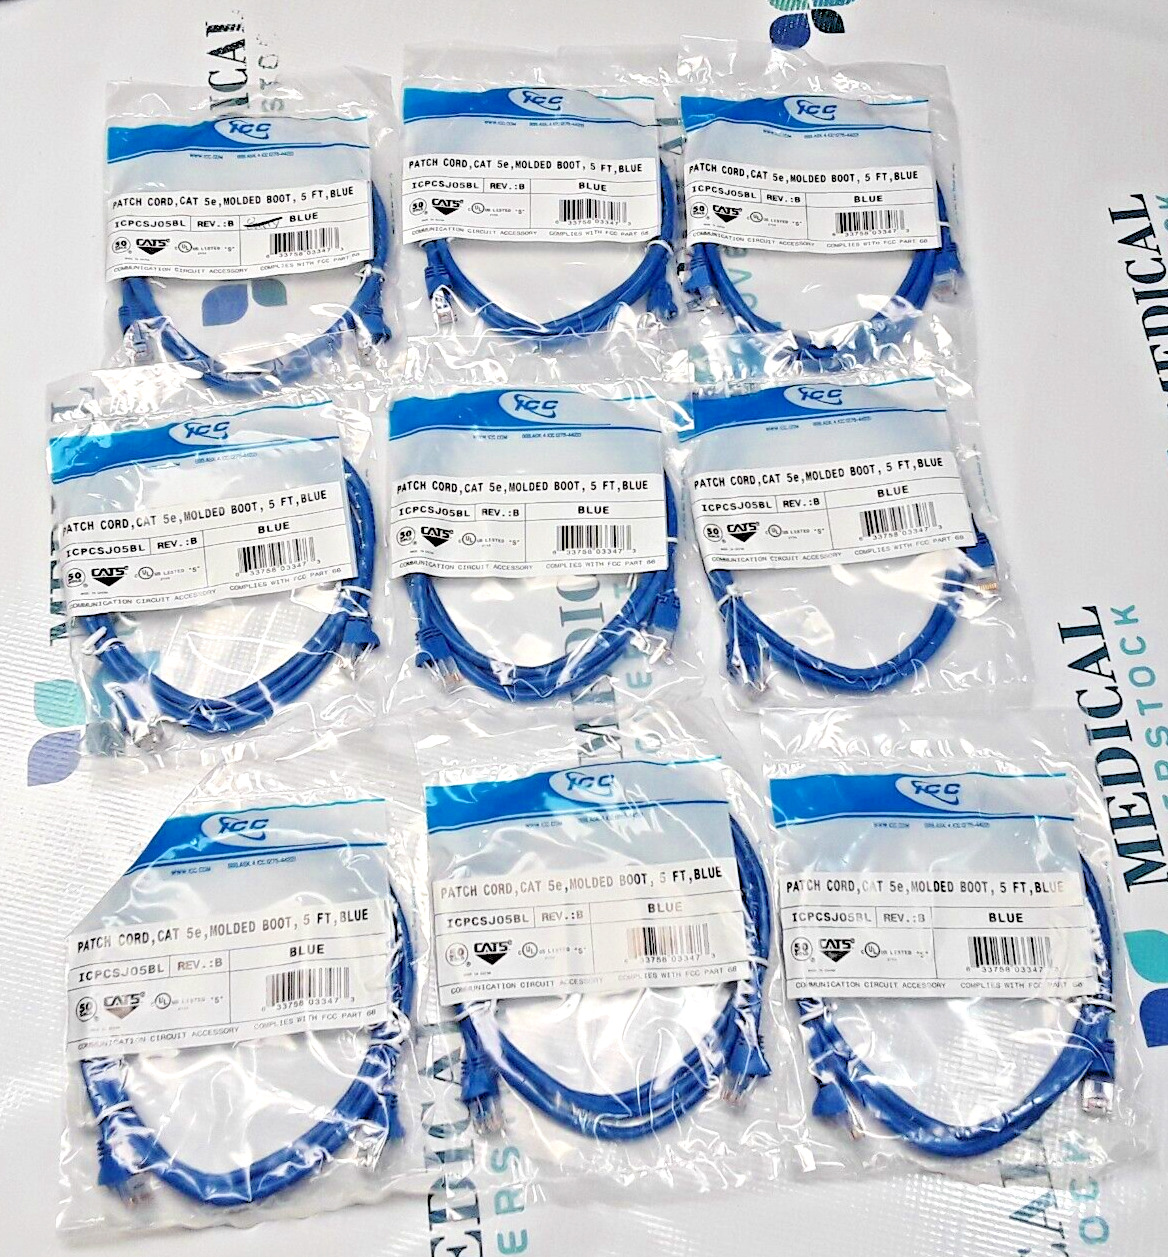 ICPCSJ05BL - ICC - PATCH CORD, CAT 5E, MOLDED BOOT - 5FT BLUE - LOTS OF 9 - NEW